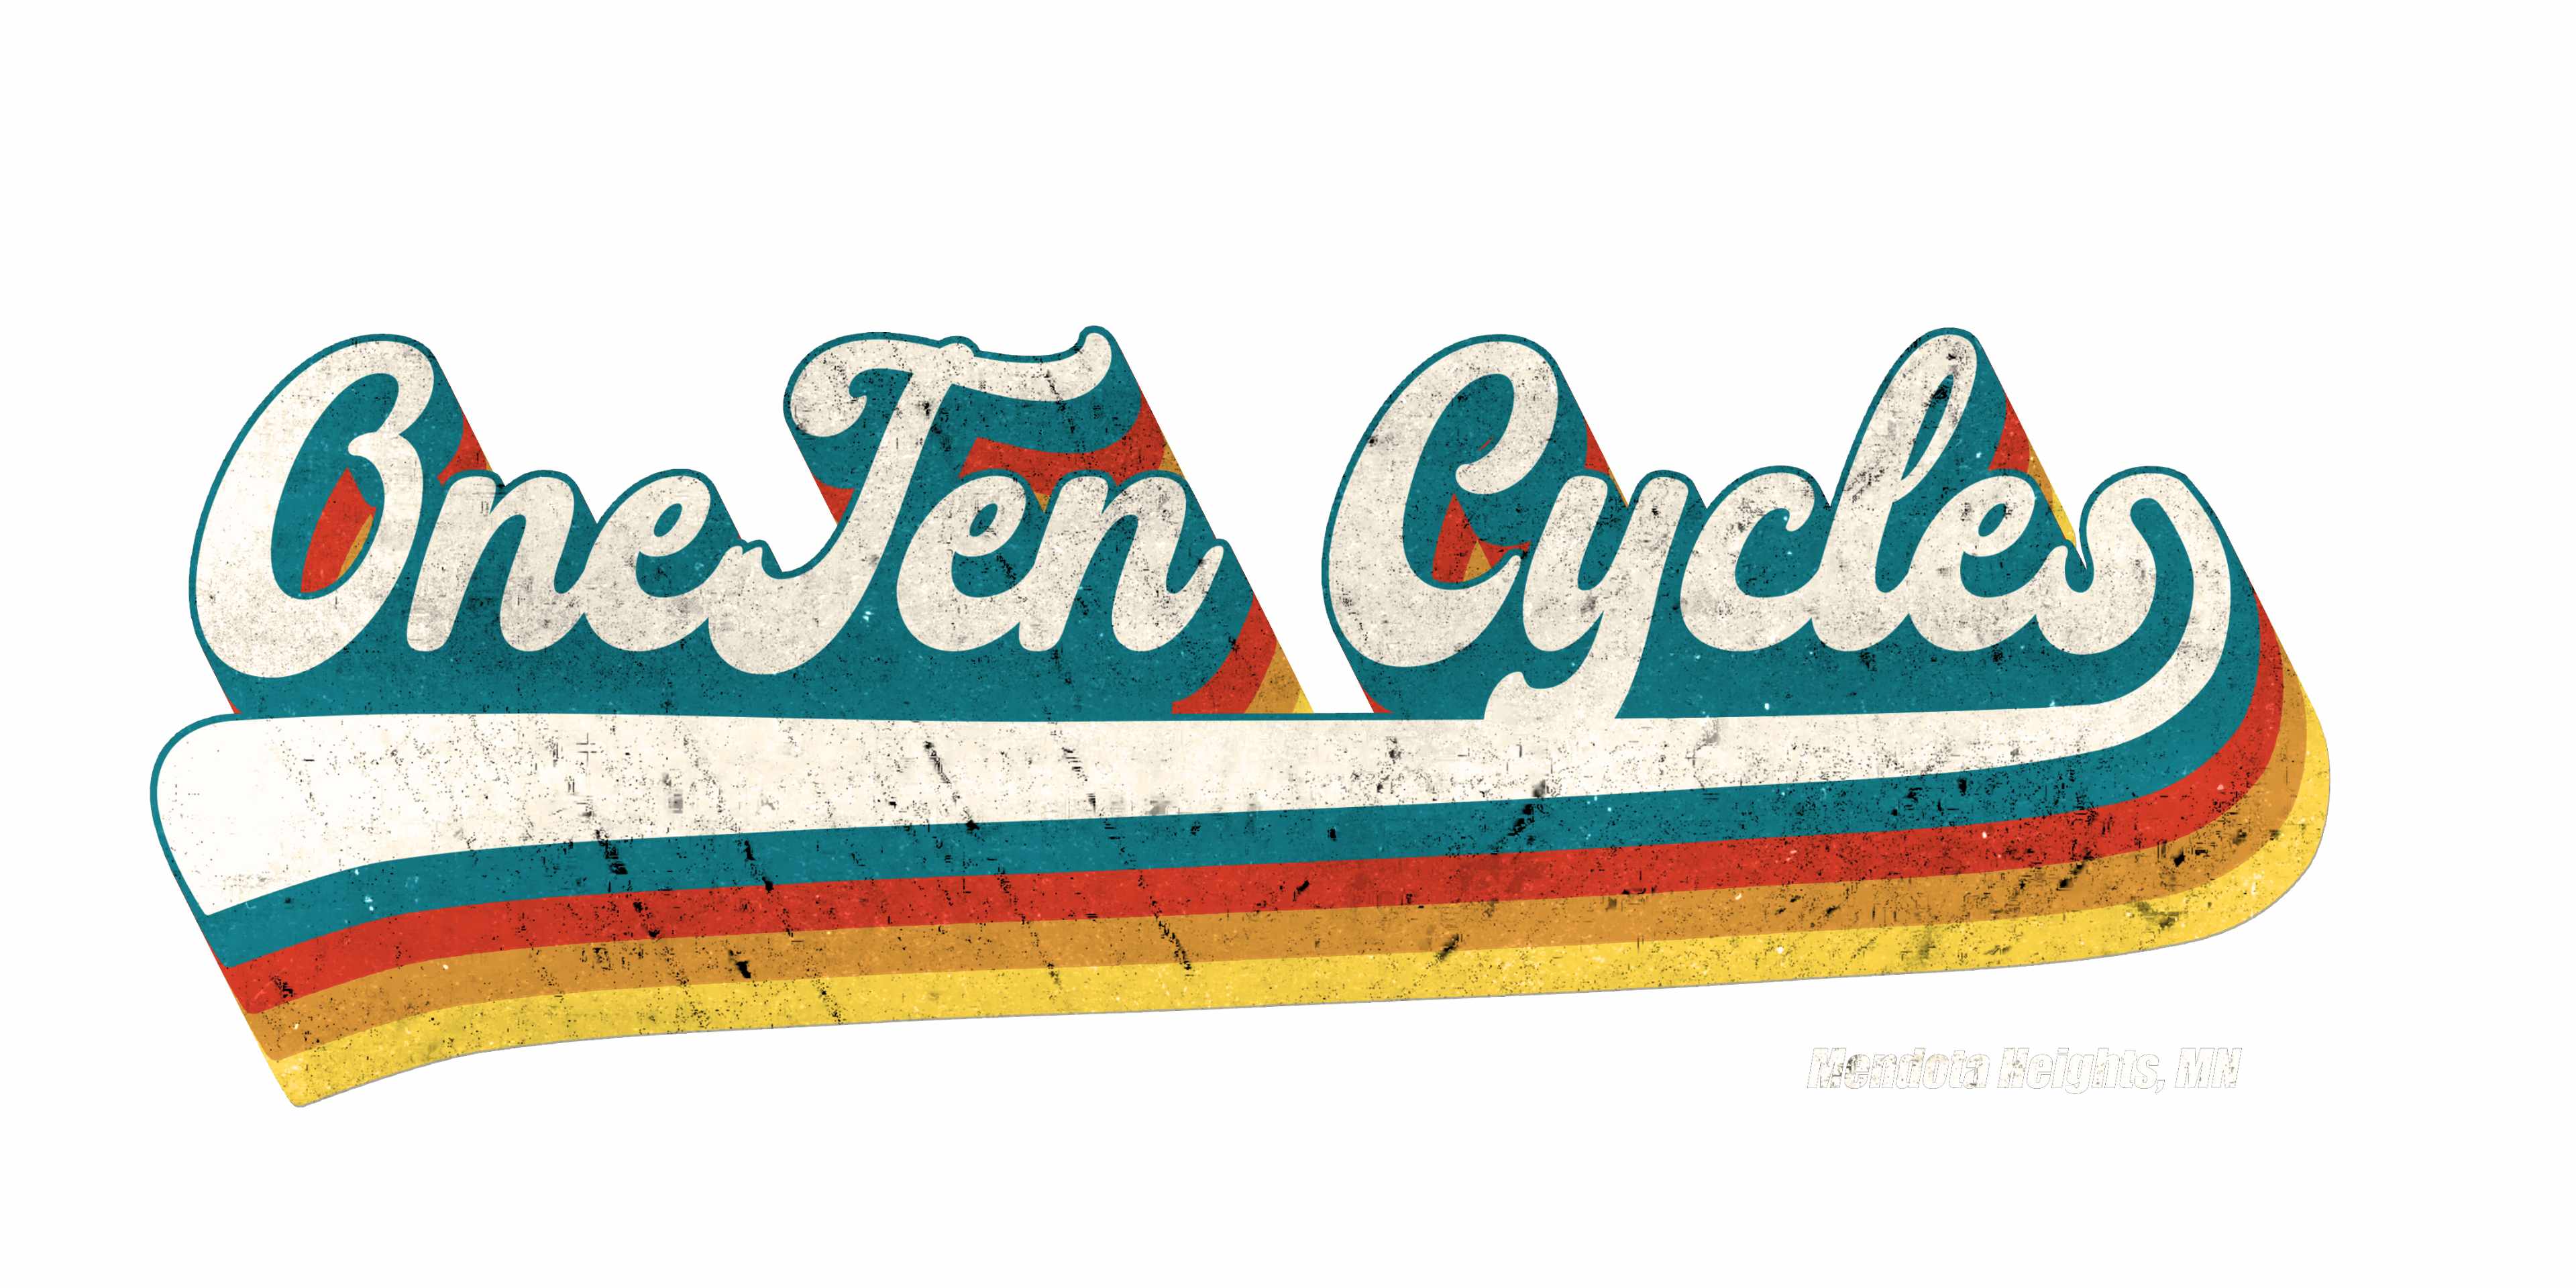 OneTen Cycles Home Page